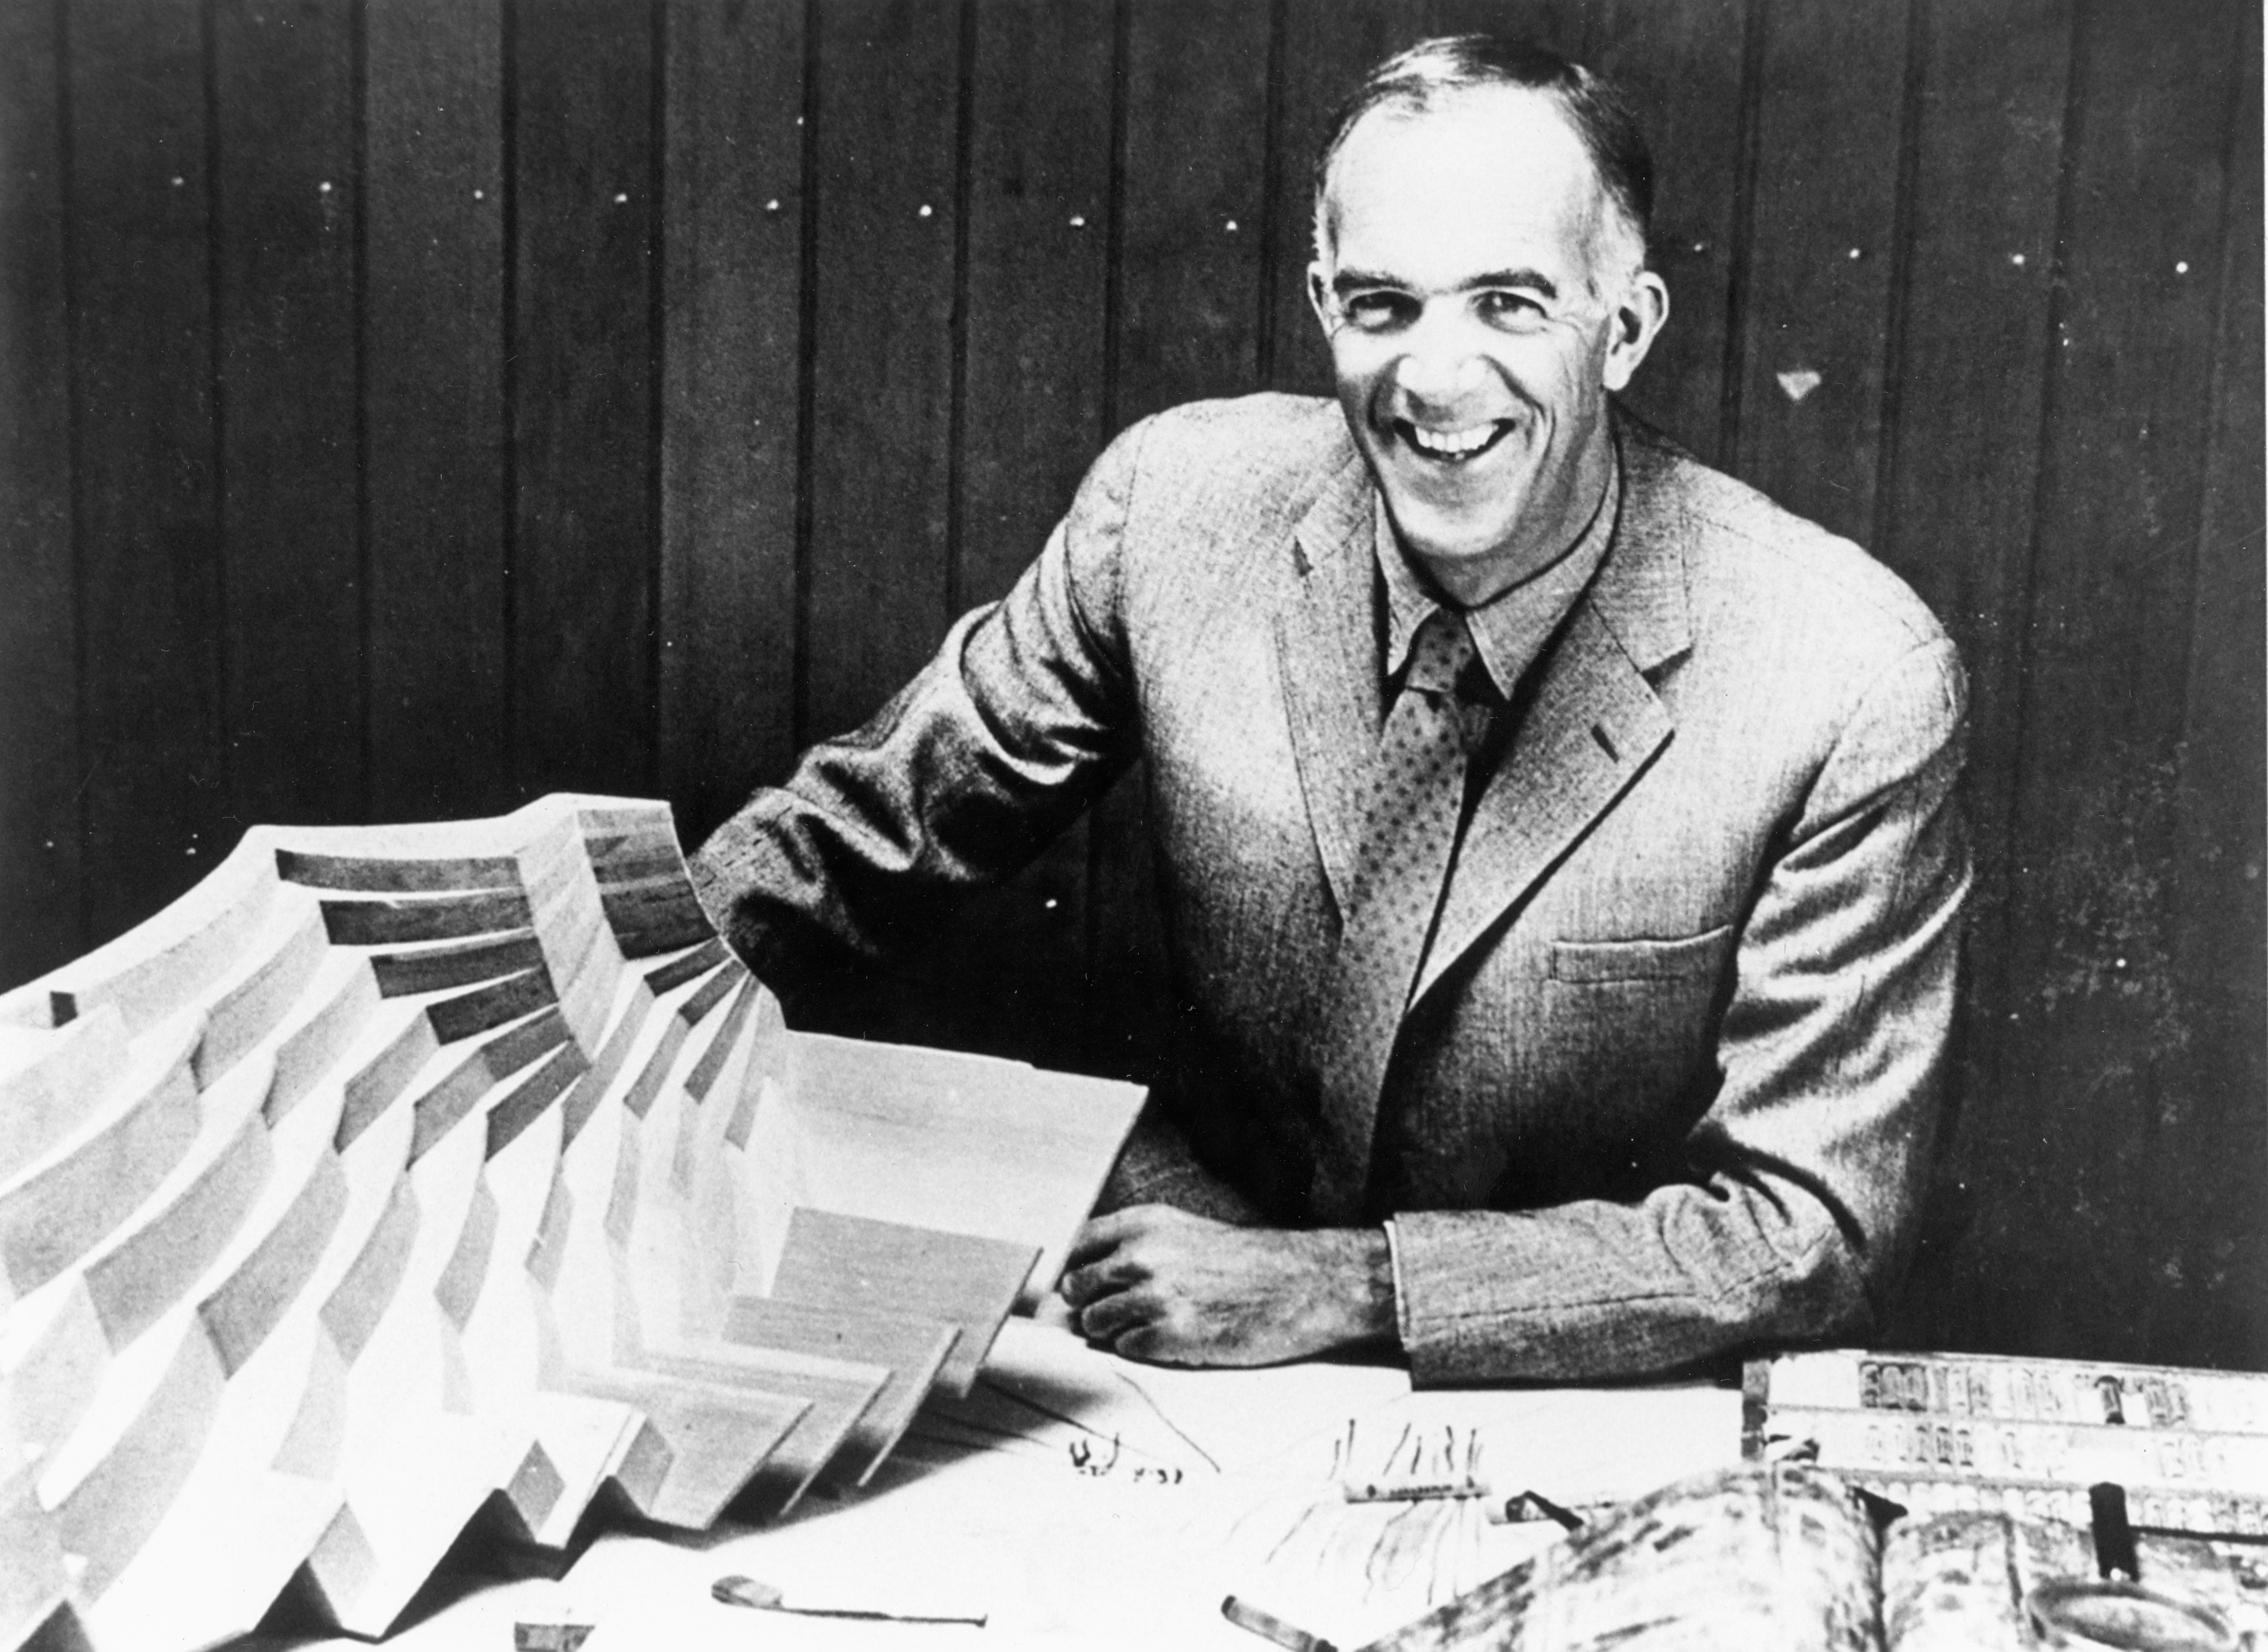 black and whilte photo of Jørn Utzon holding a model representing part of the internal structure of the Sydney Opera House